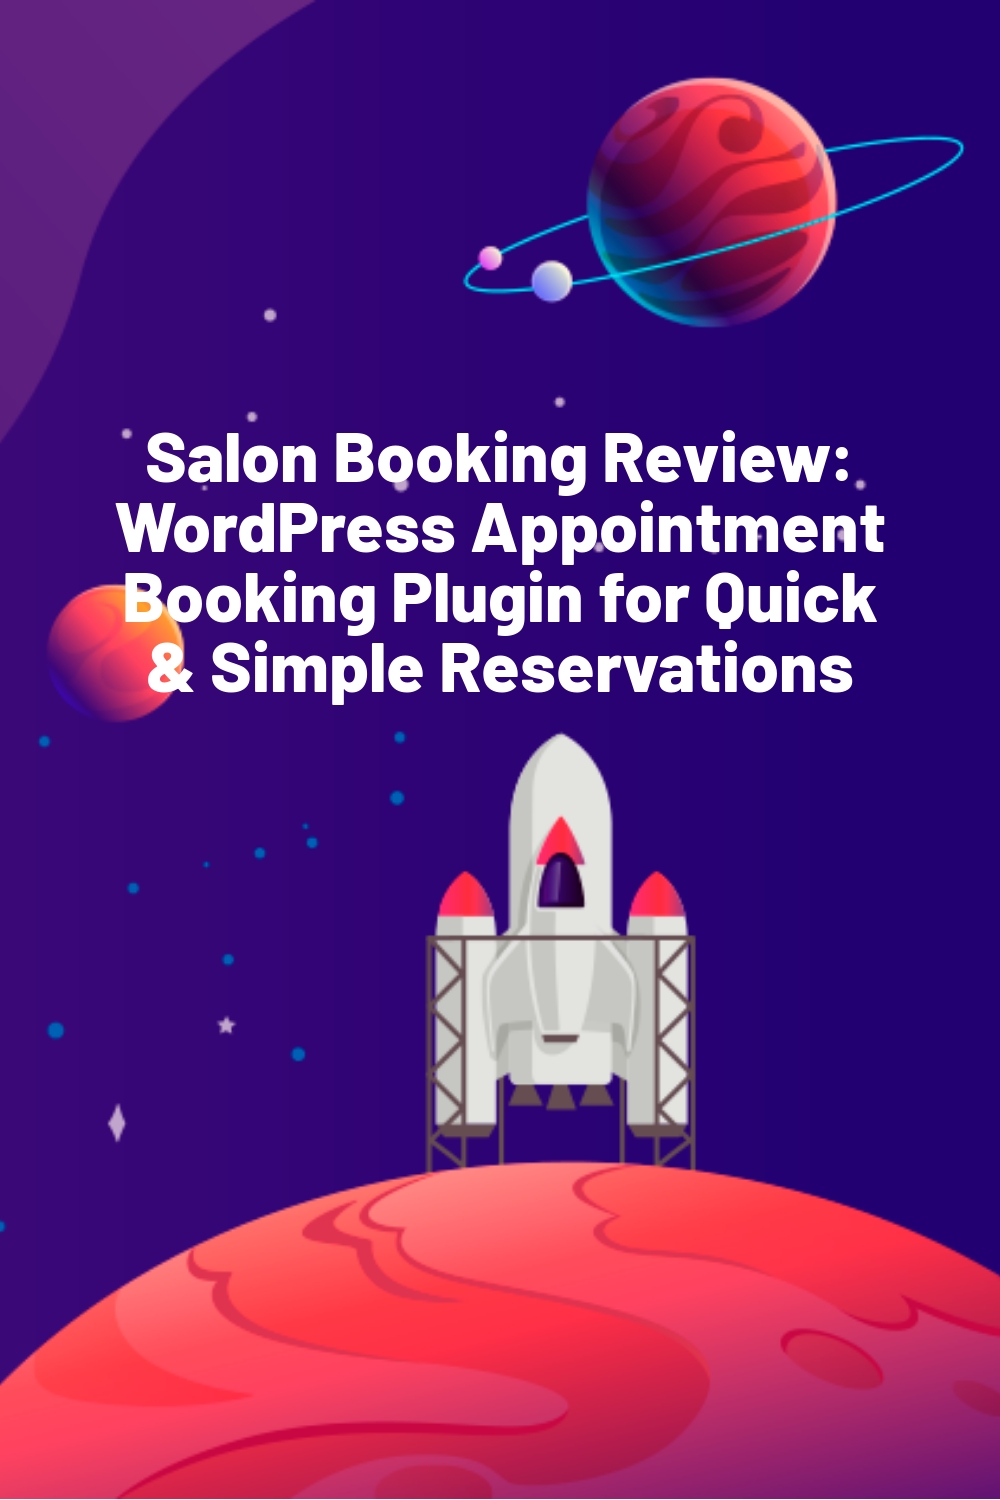 Salon Booking Review: WordPress Appointment Booking Plugin for Quick & Simple Reservations